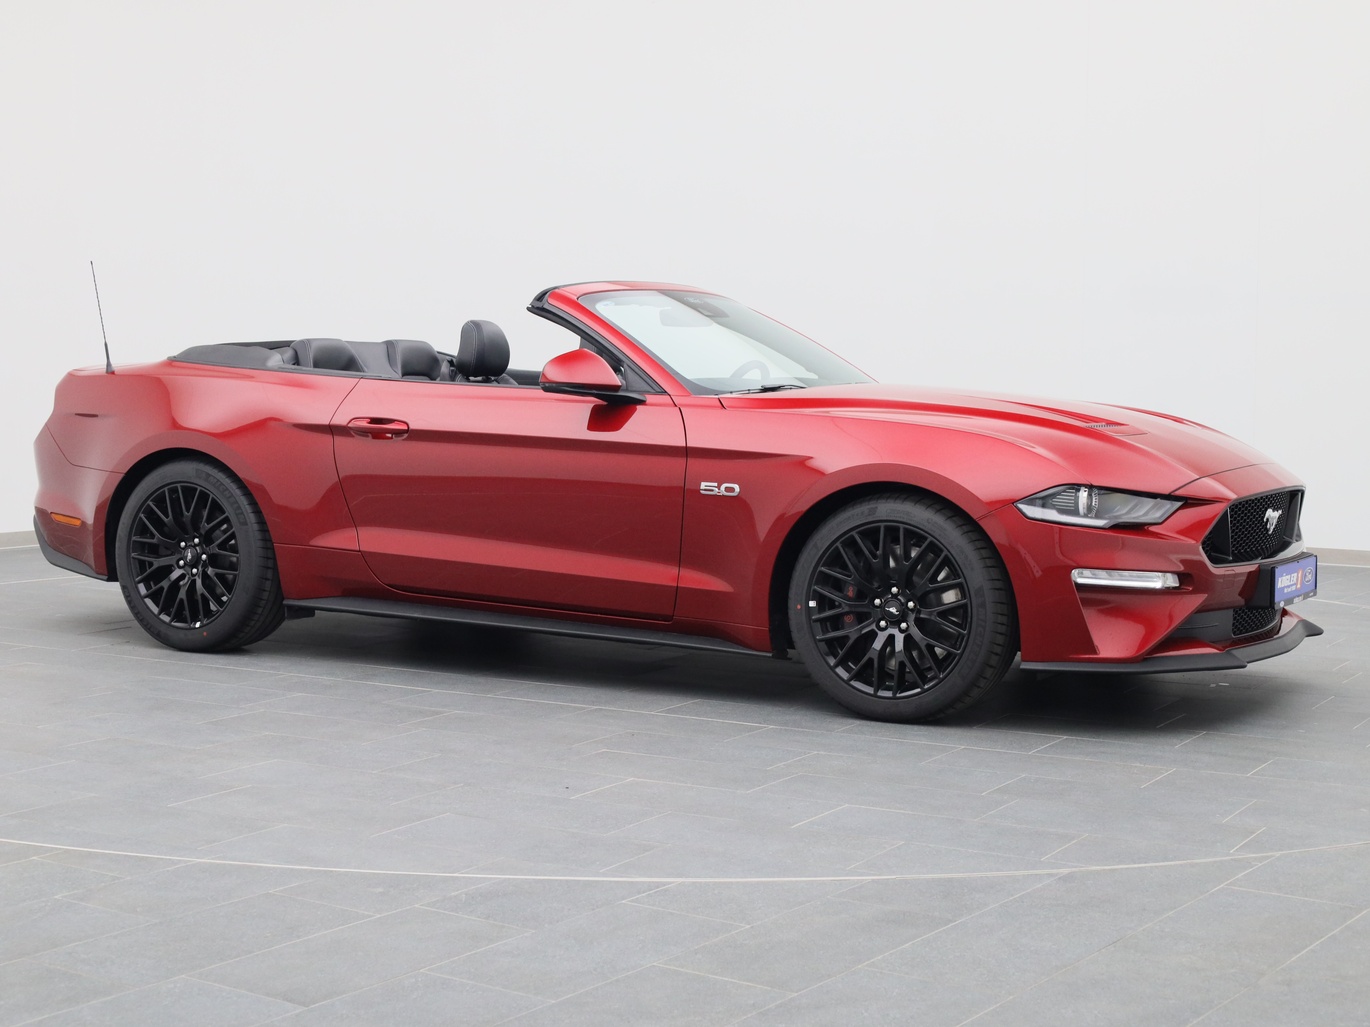  Ford Mustang GT Cabrio V8 450PS / Premium 2 / Magne in Lucid Rot 